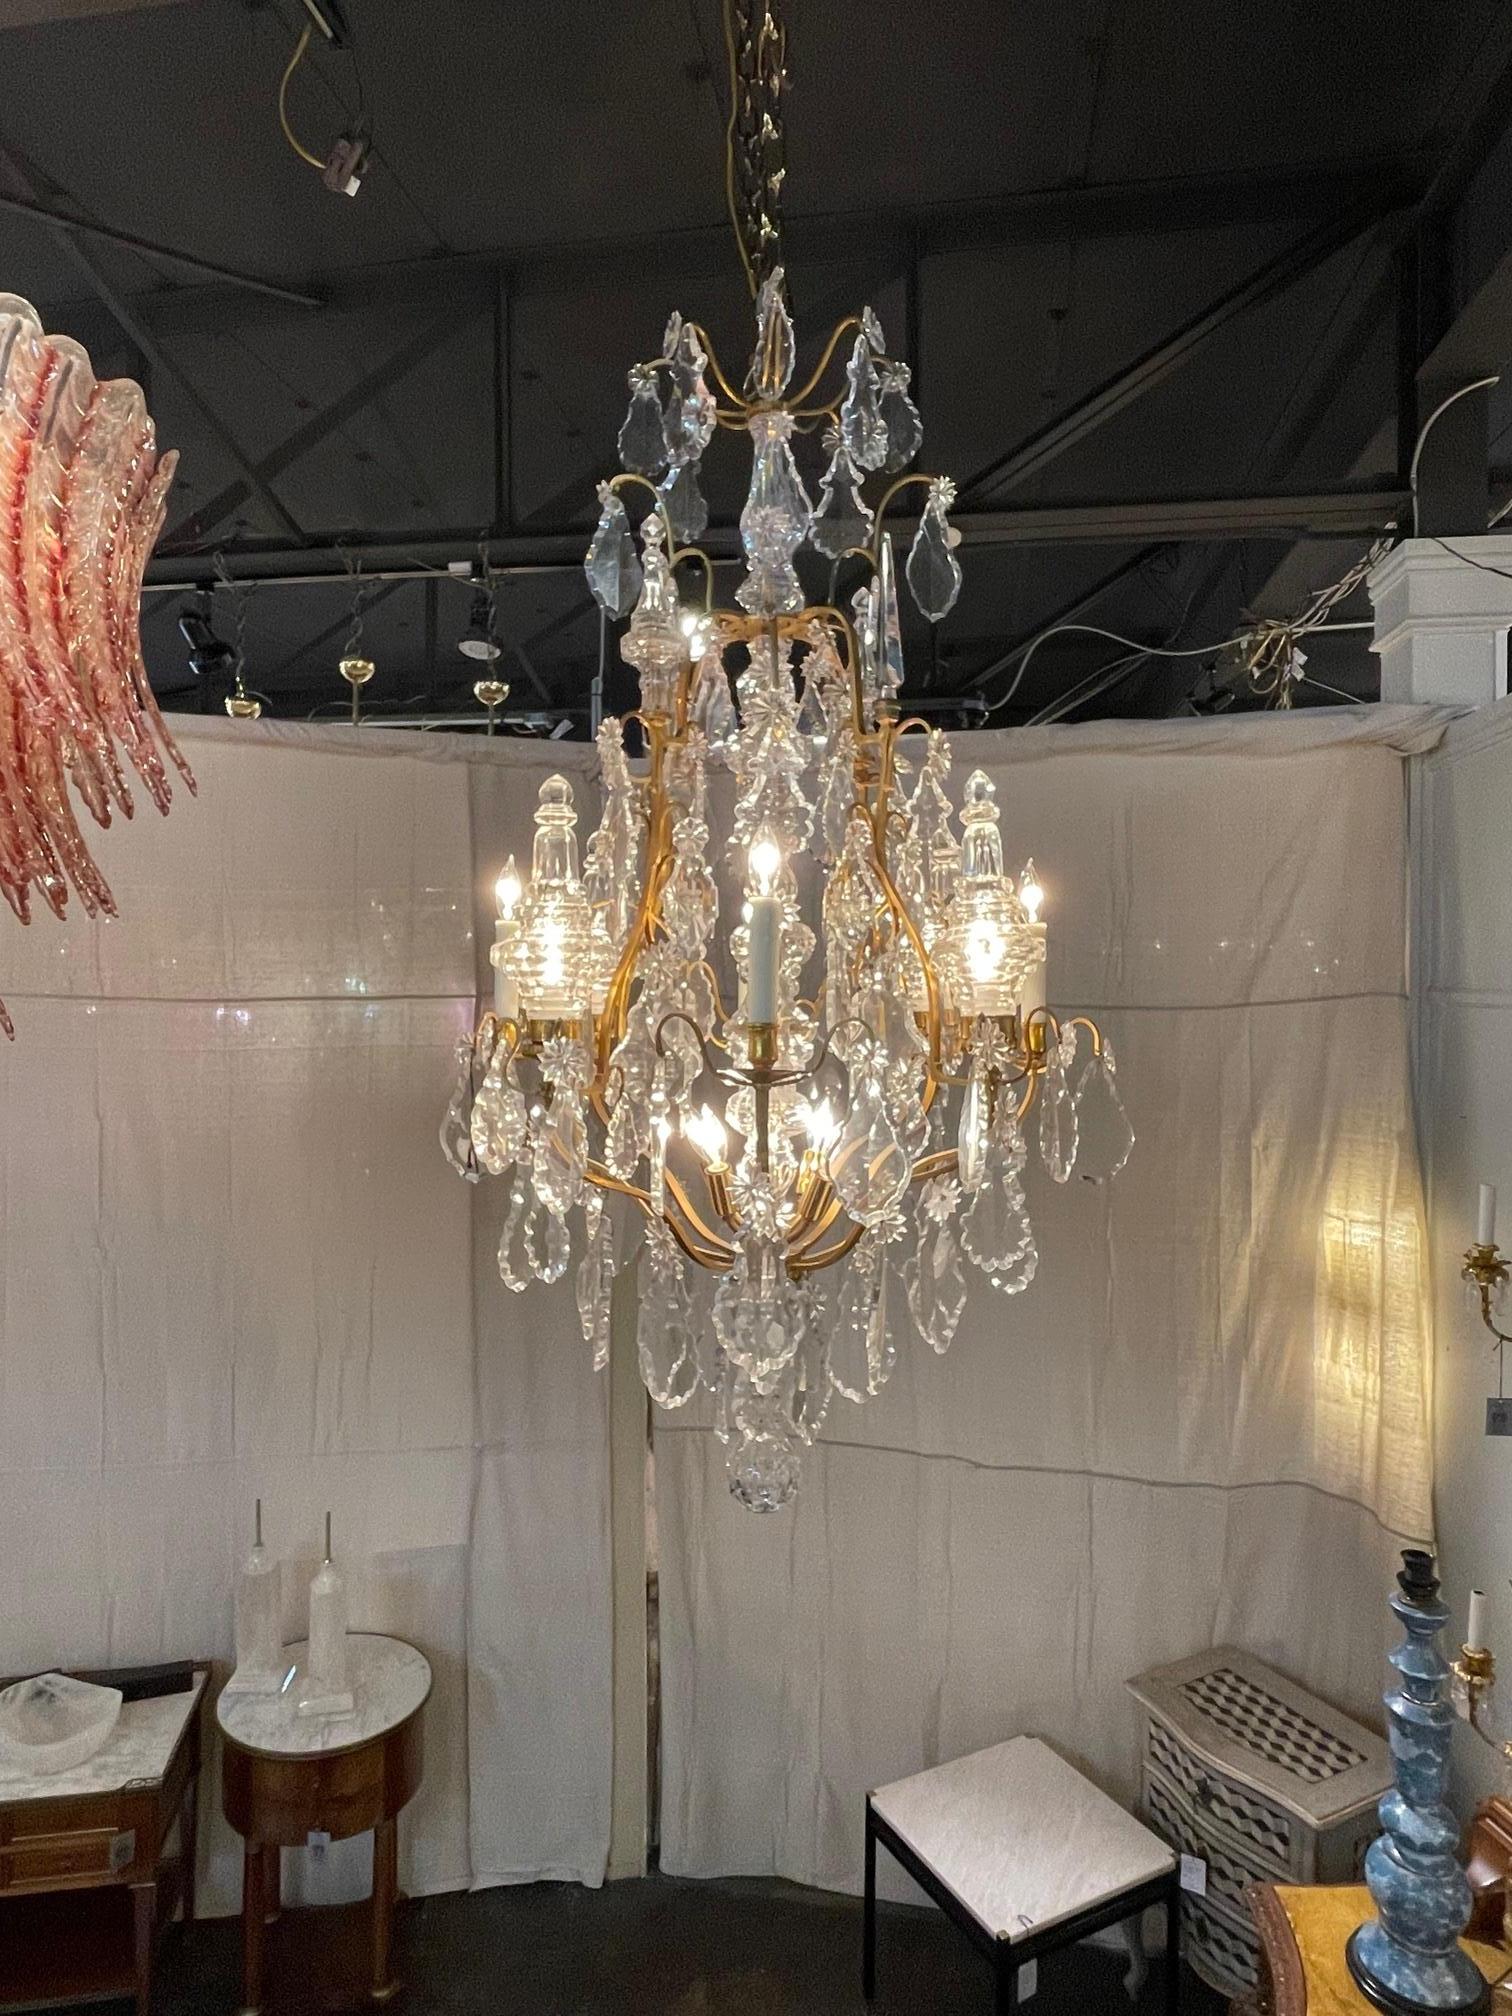 Fine 19 century French Baccarat crystal and Dore' bronze chandelier, Circa 1870. The chandelier has been professionally re-wired, cleaned and is ready to hang. Includes matching chain and canopy.
   